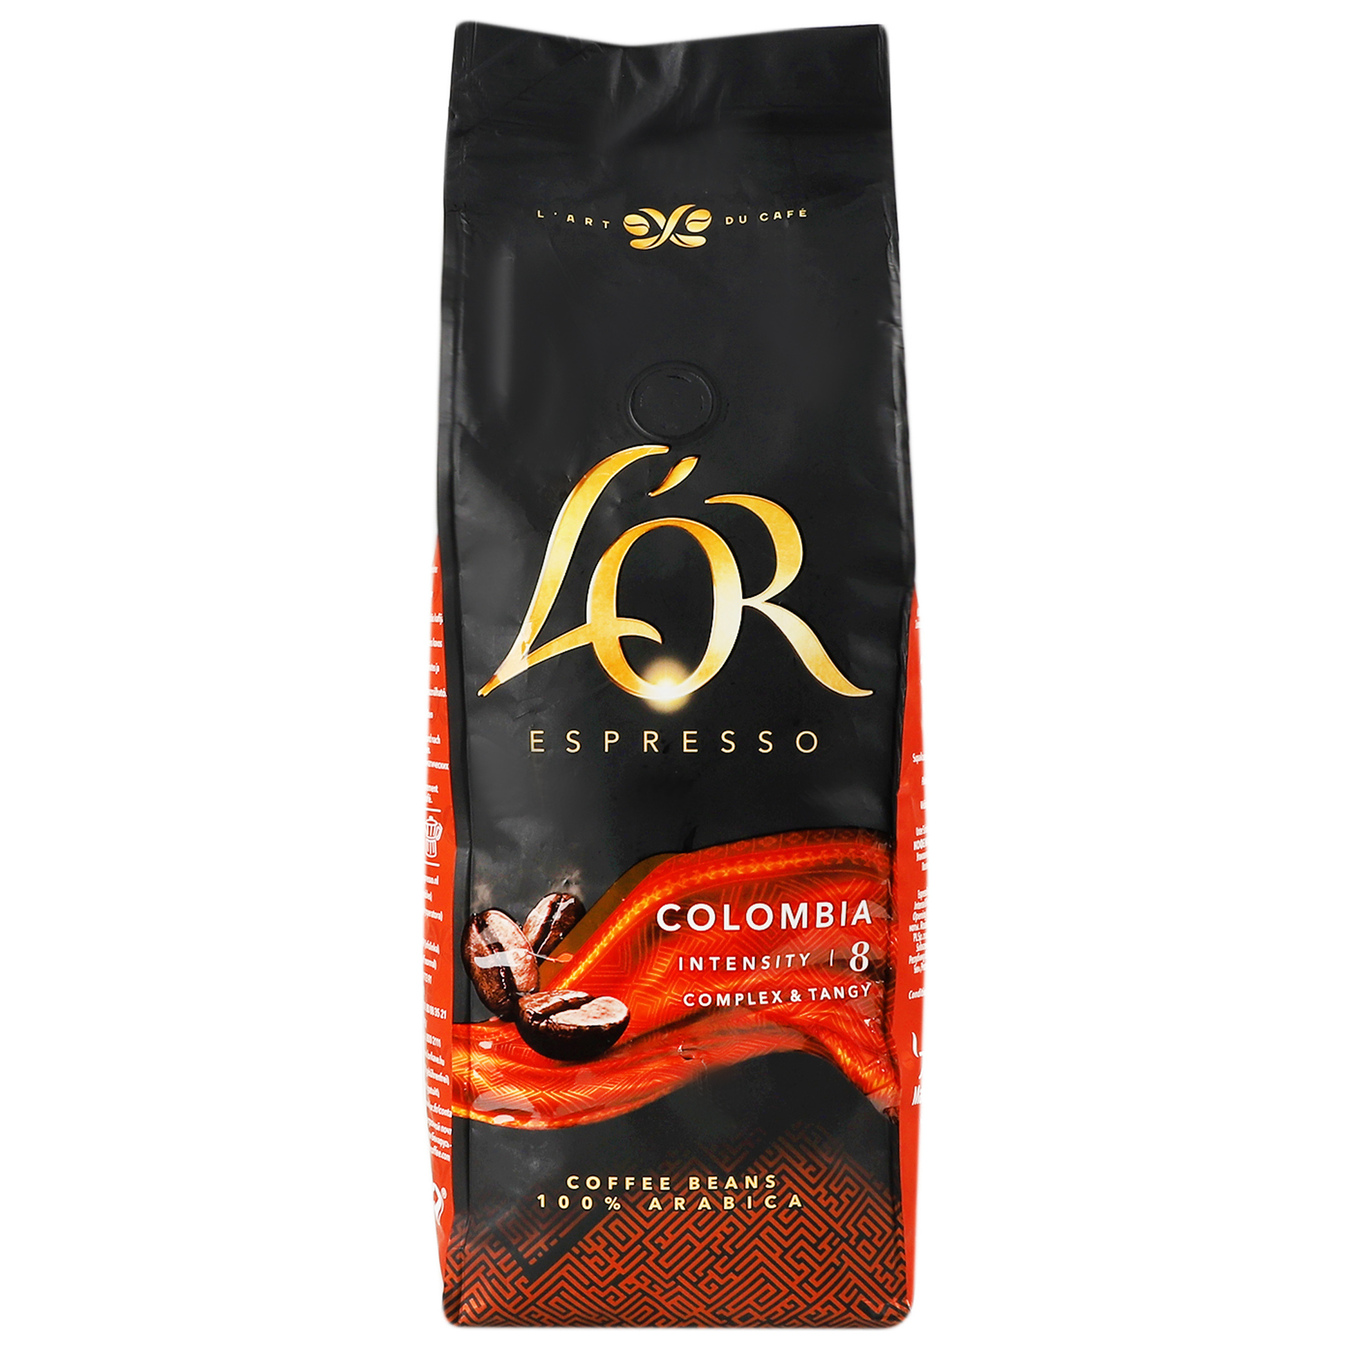 L'or Espresso Colombia Coffee Beans 500g